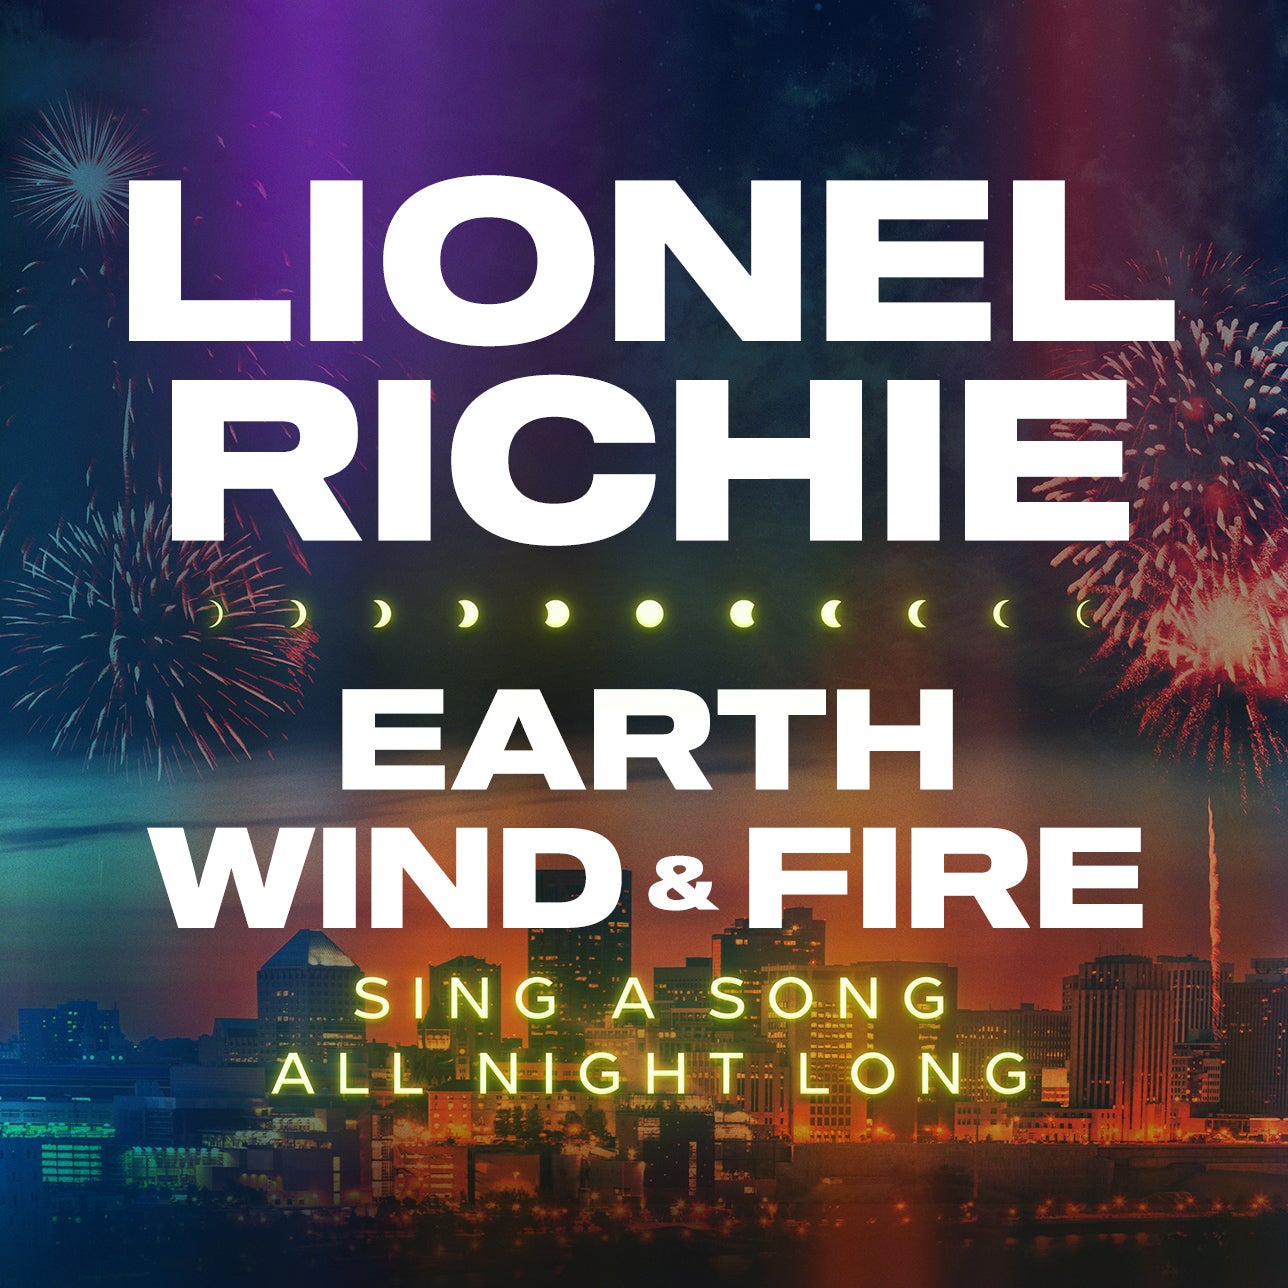 Lionel Richie and Earth, Wind & Fire